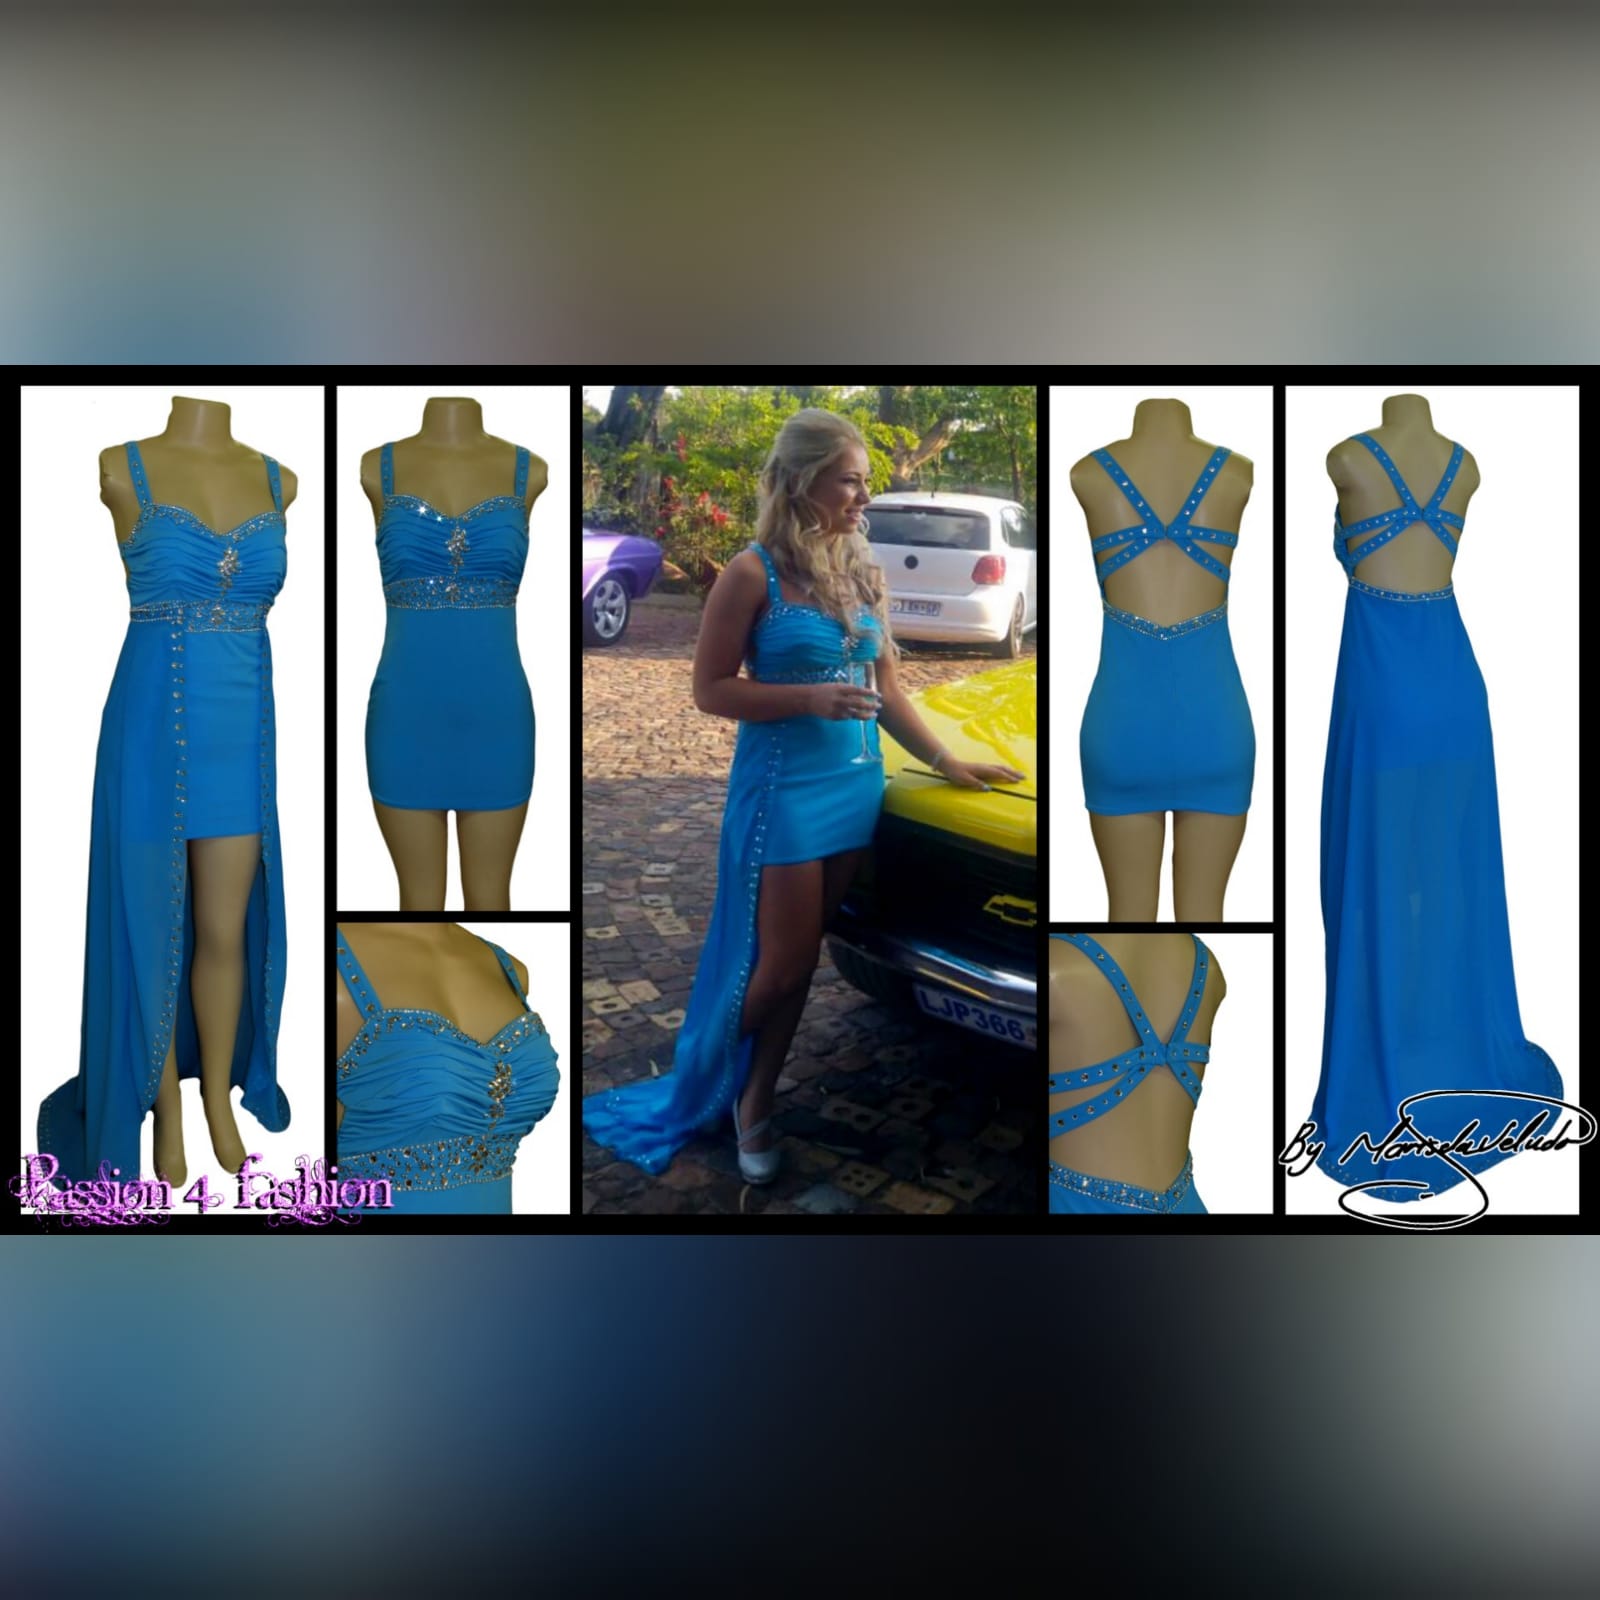 2 in 1 blue and silver prom mini dress 7 2 in 1 blue and silver prom dance mini dress with a chiffon detachable flowy piece creating a high low. Ruched bodice detailed in silver.